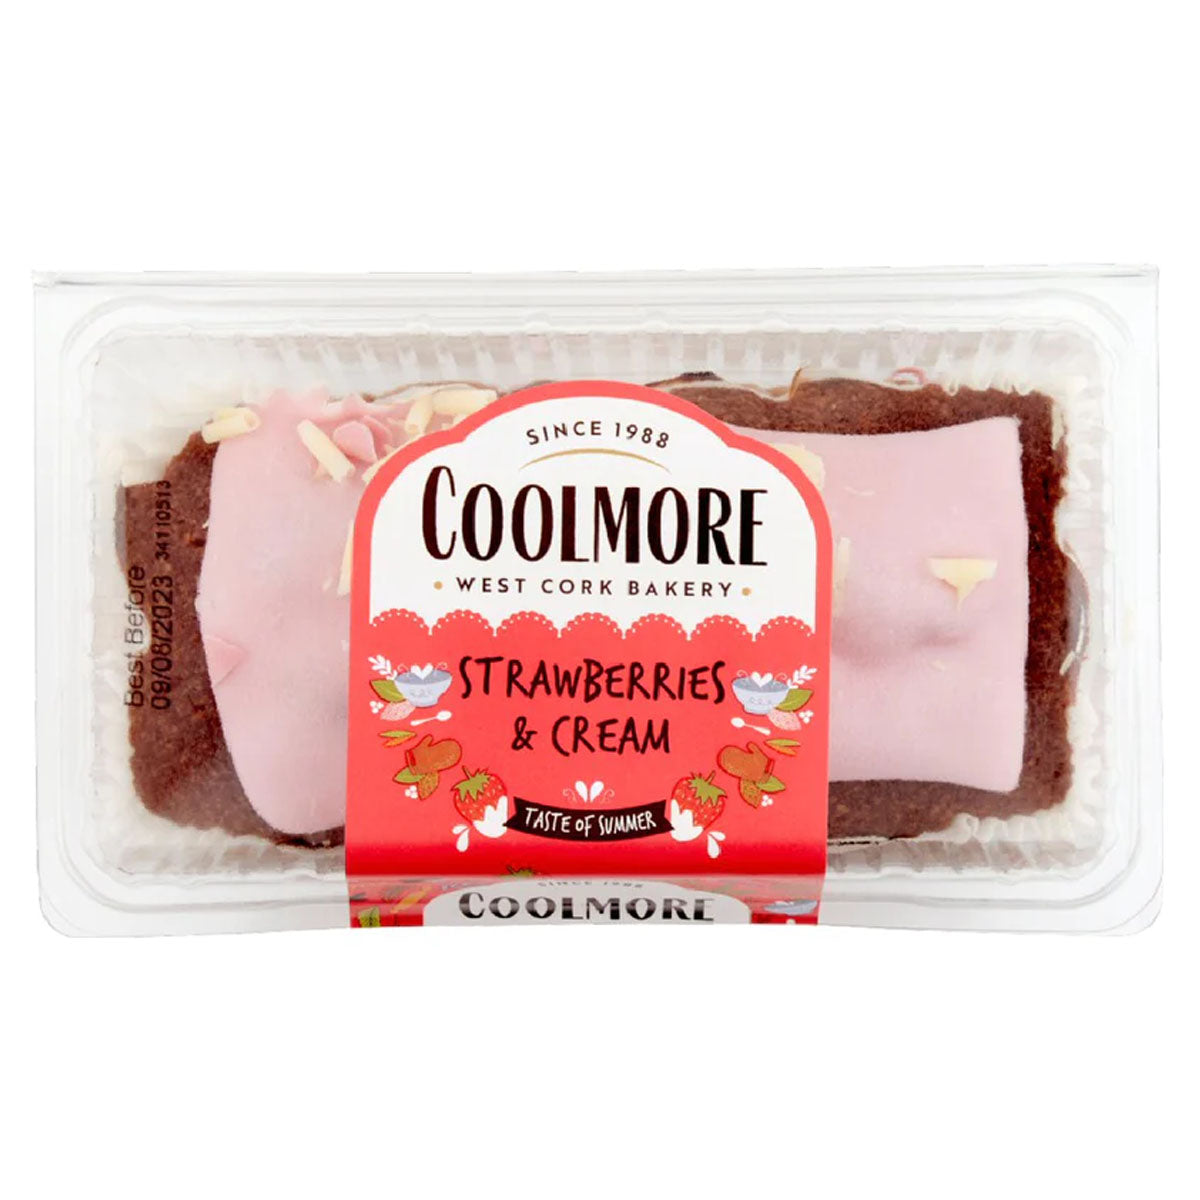 Coolmore - Strawberries & Cream Cake - 400g in a plastic container.